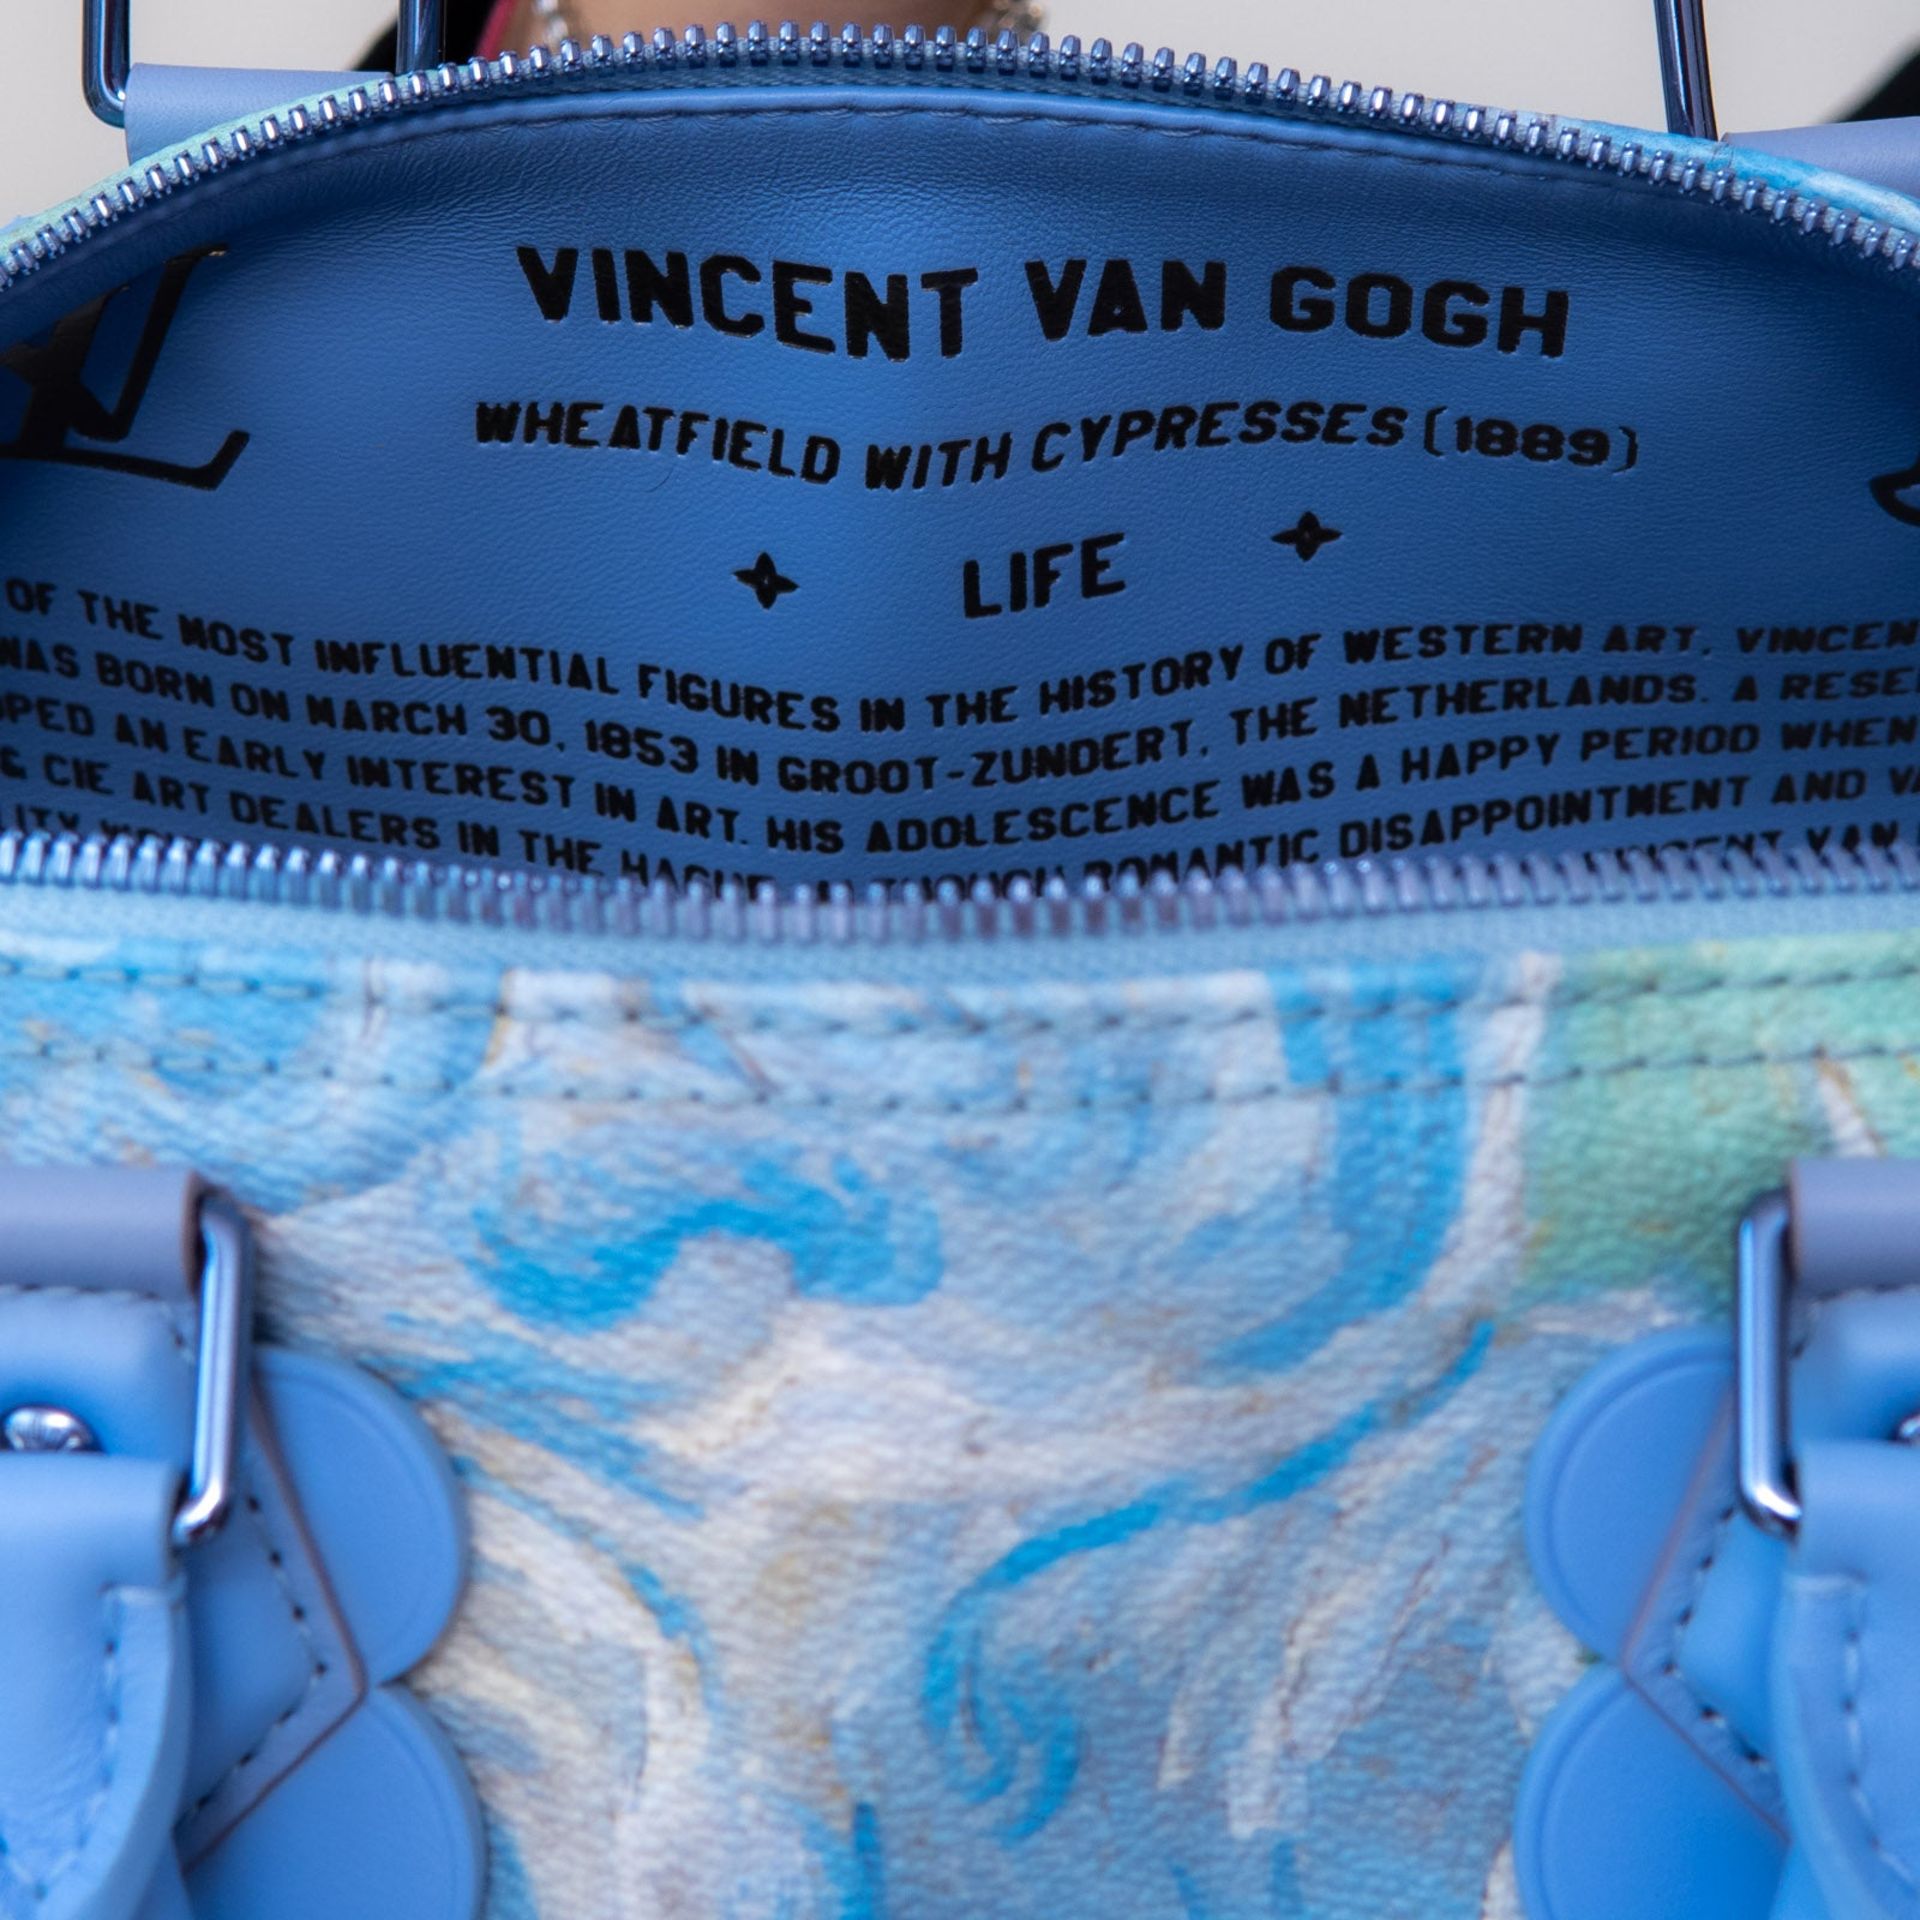 Louis Vuitton Limited Edition Lavender Speedy 30 Jeff Koons Van Gogh Masters Collection - Image 14 of 18